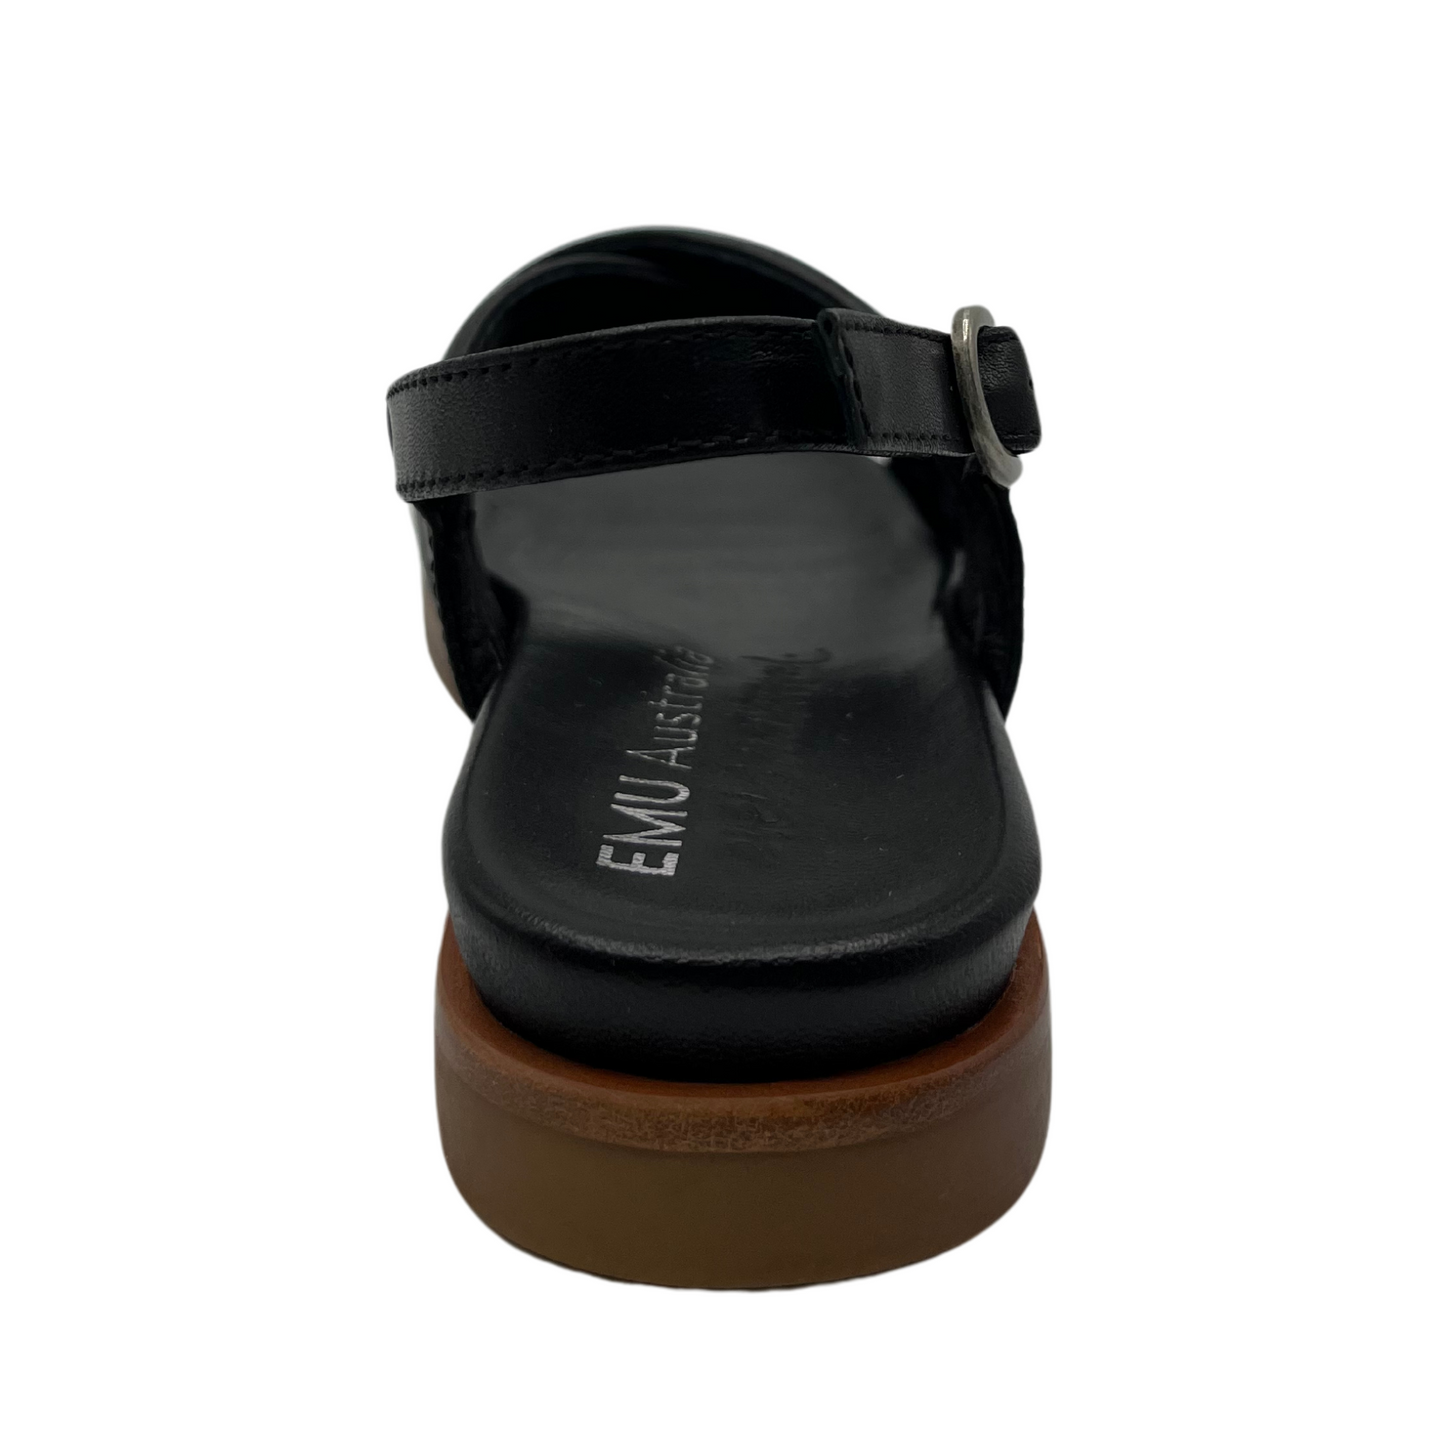 Back view of black leather sandal with padded cross over straps and sling back buckle strap